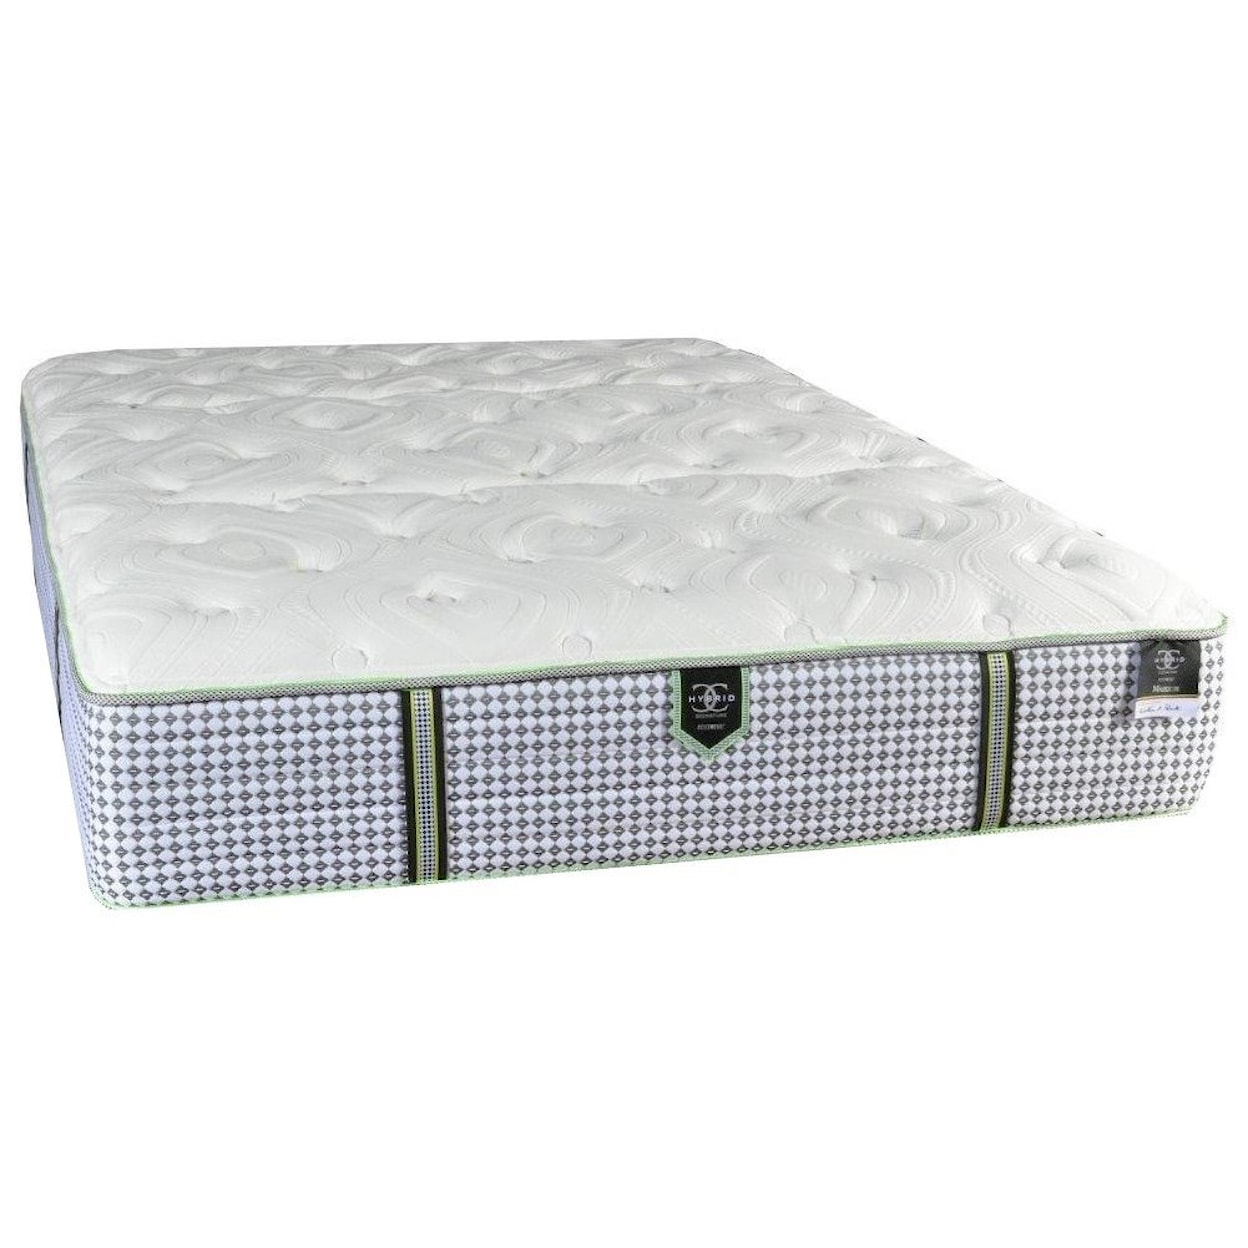 Restonic Marquis Plush Queen Pocketed Coil Mattress